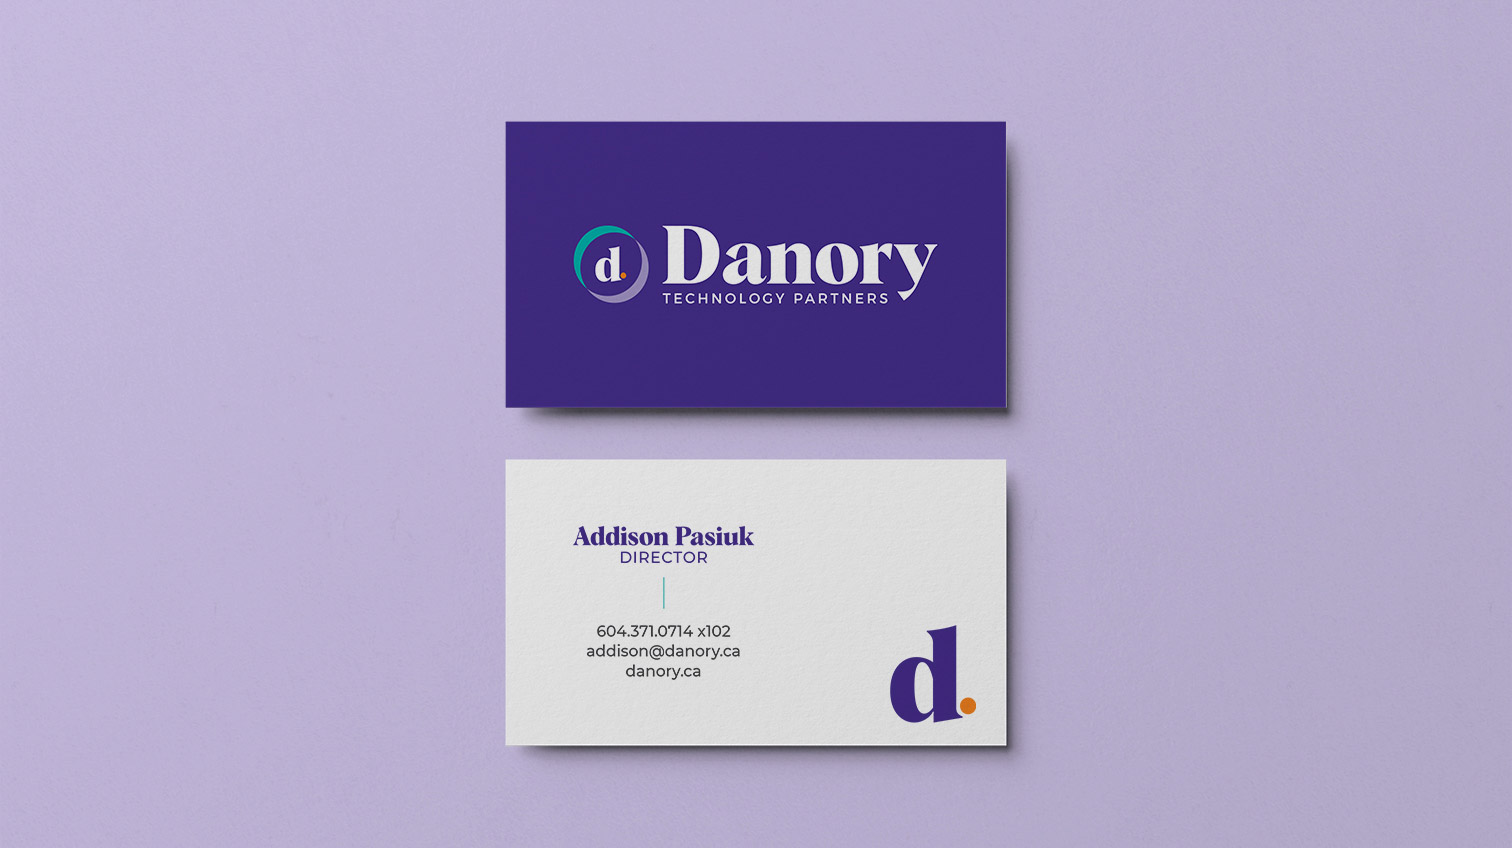 Danory business card design, front and back - White Canvas Design